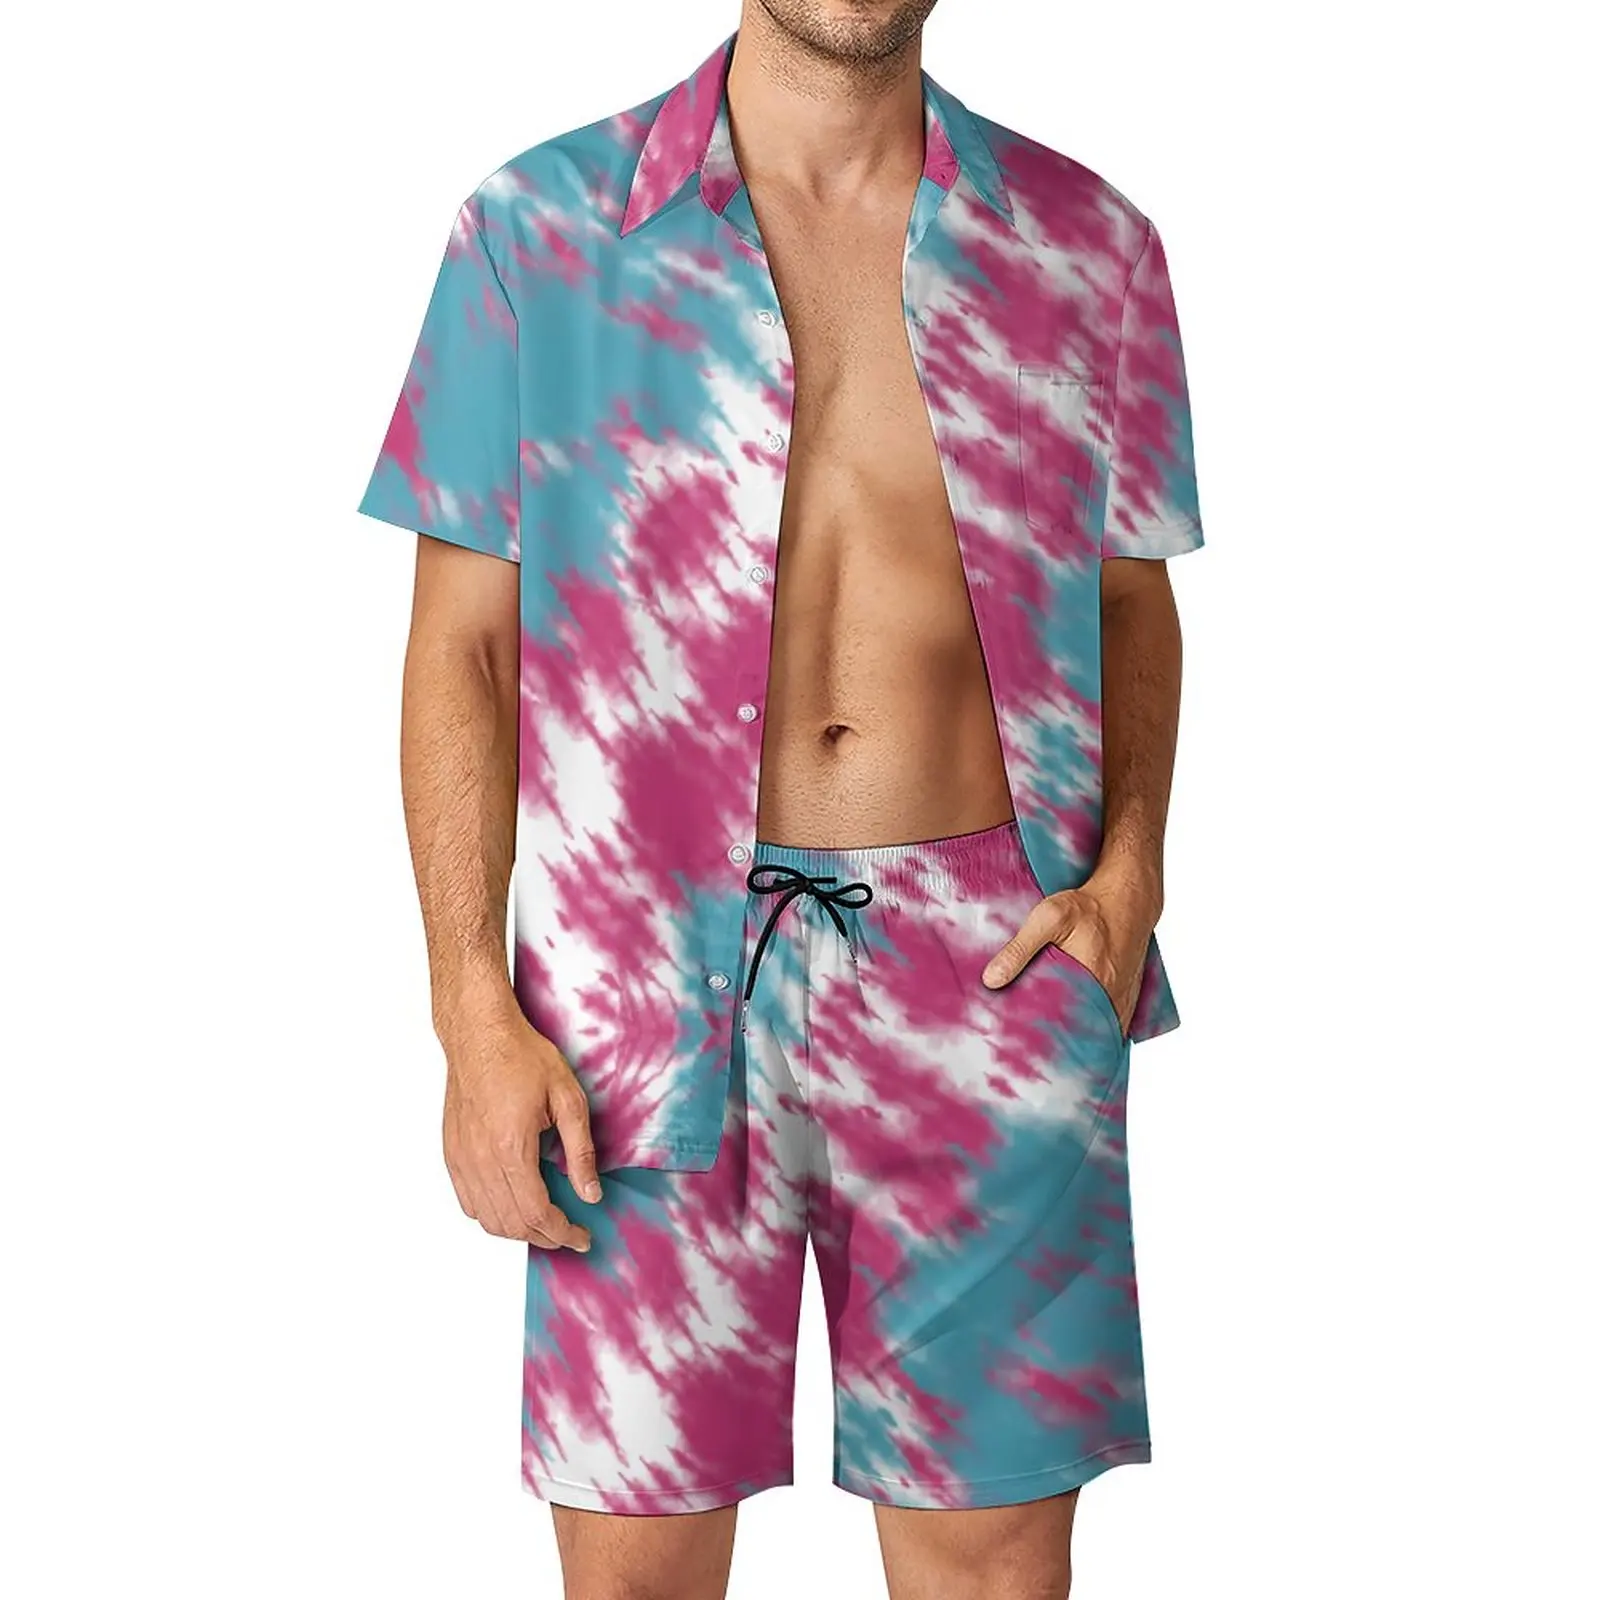 

2 Pieces Pantdress Tie Dye (6) High Grade Men's Beach Suit Funny Graphic Swimming USA Size